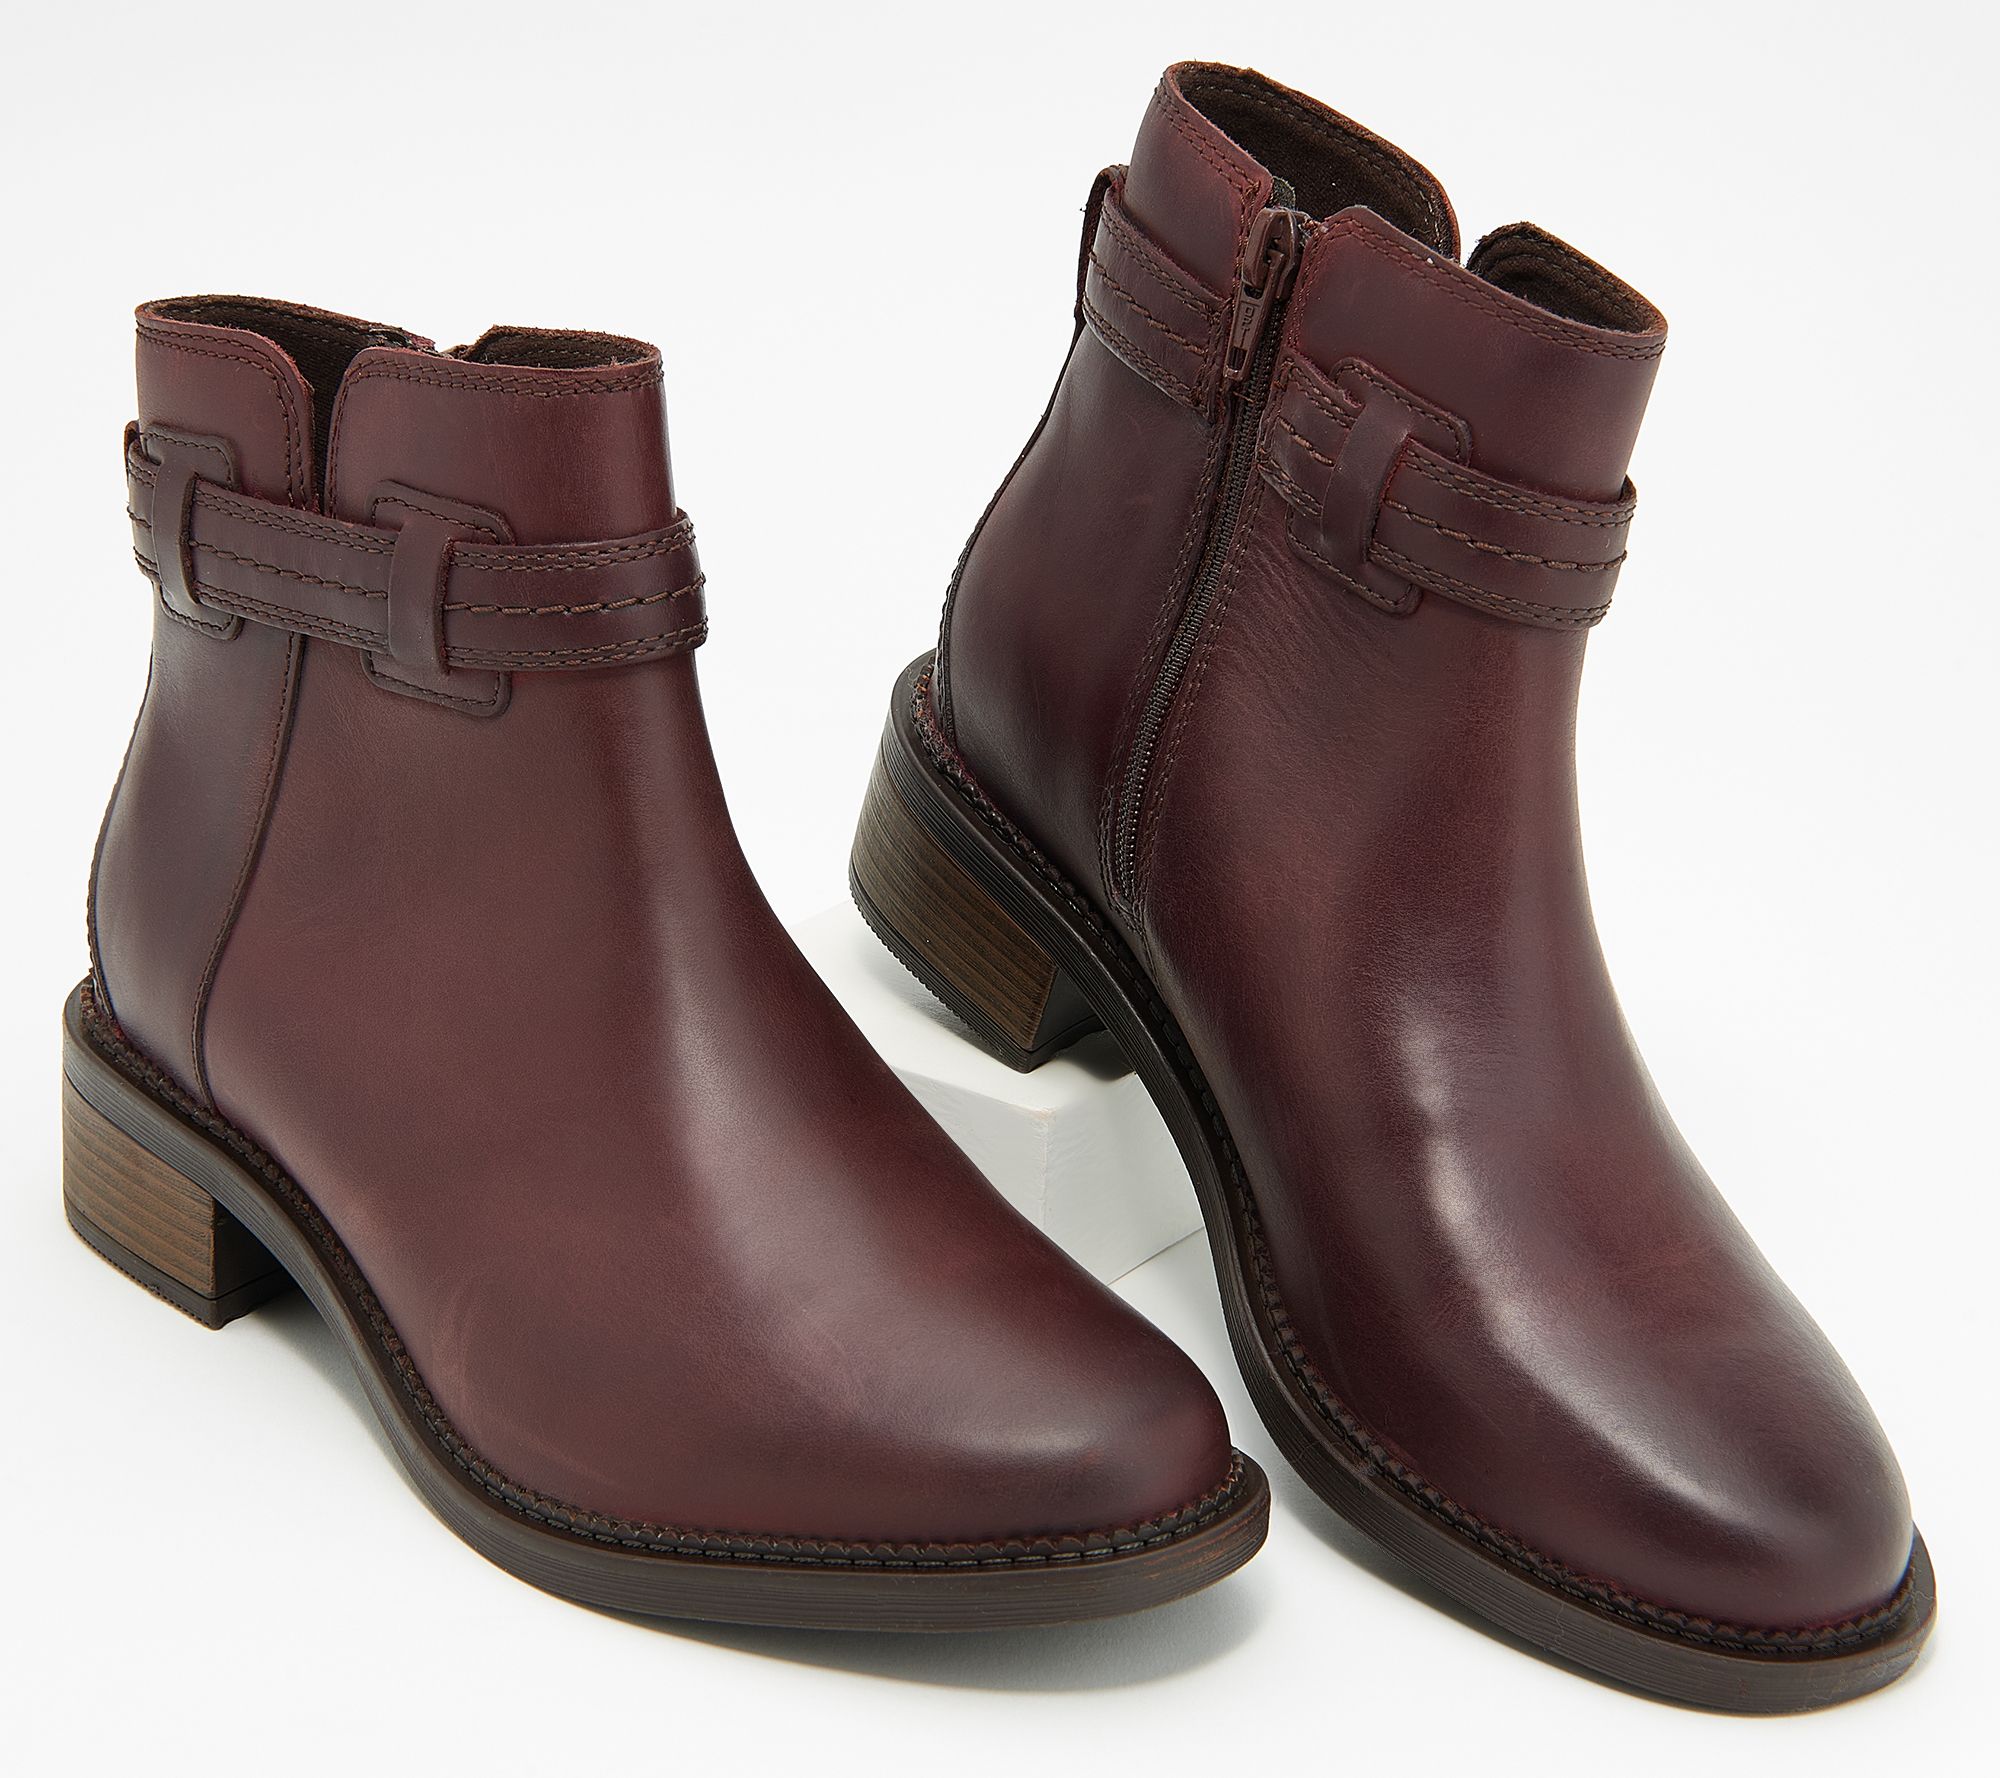 Clarks Leather Ankle Boots - Maye QVC.com